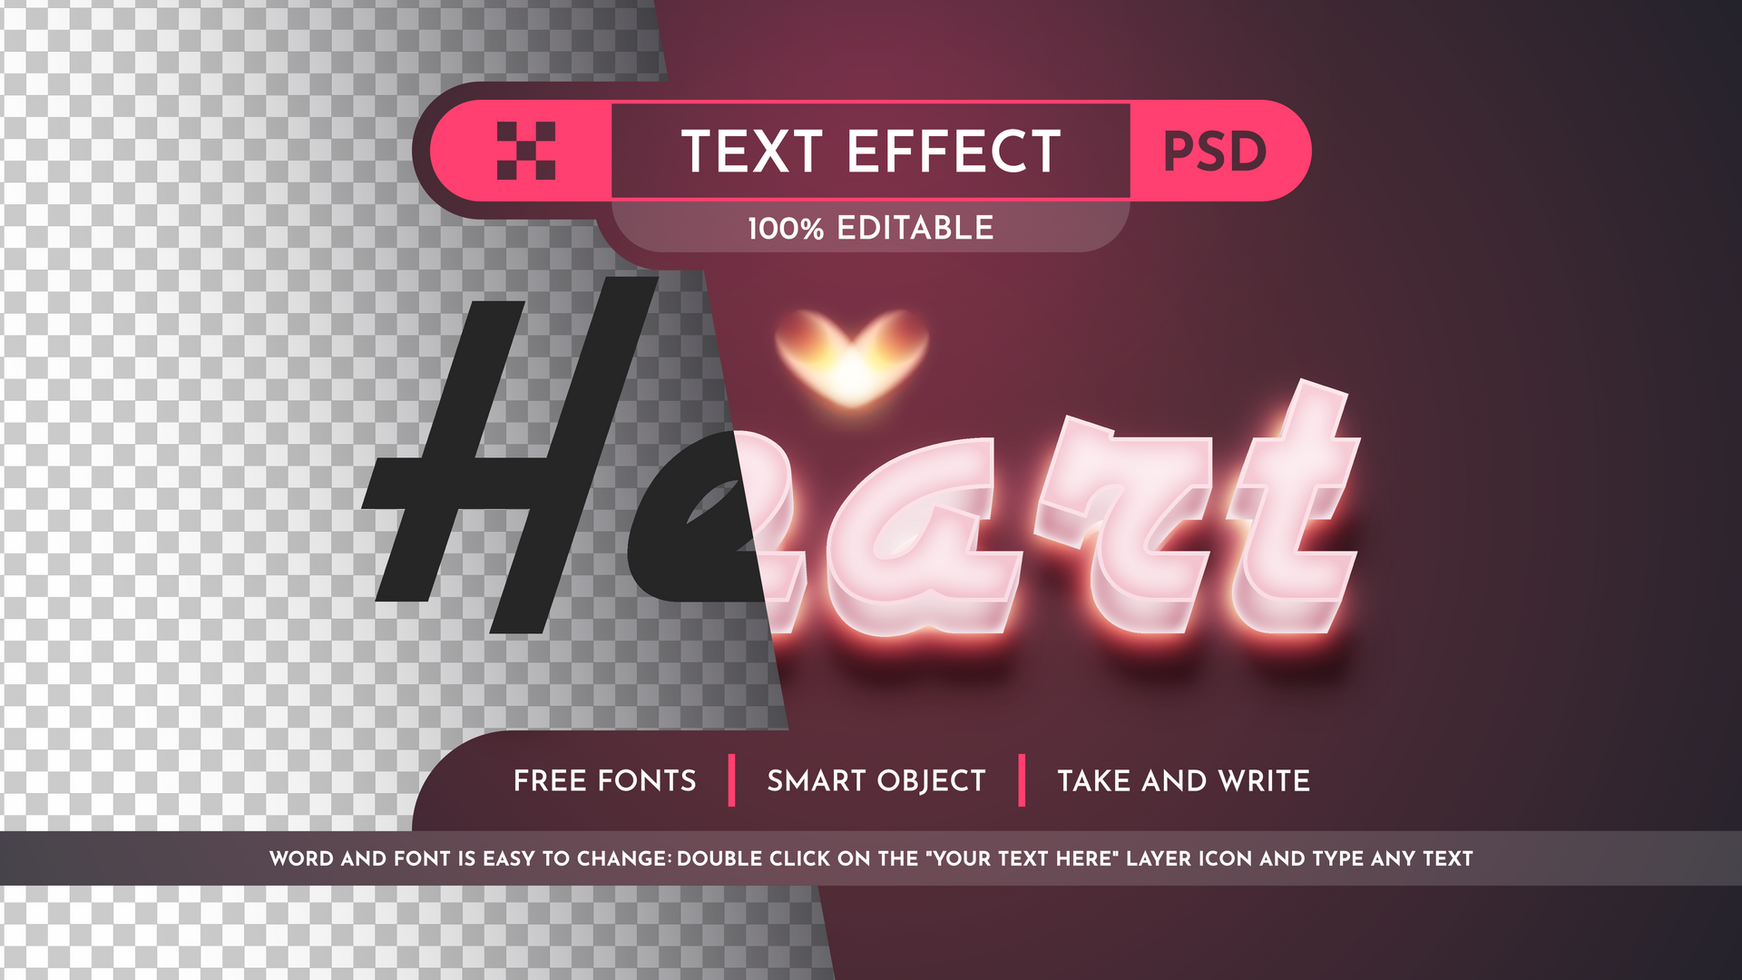 Cupid - Editable Text Effect, Font Style psd